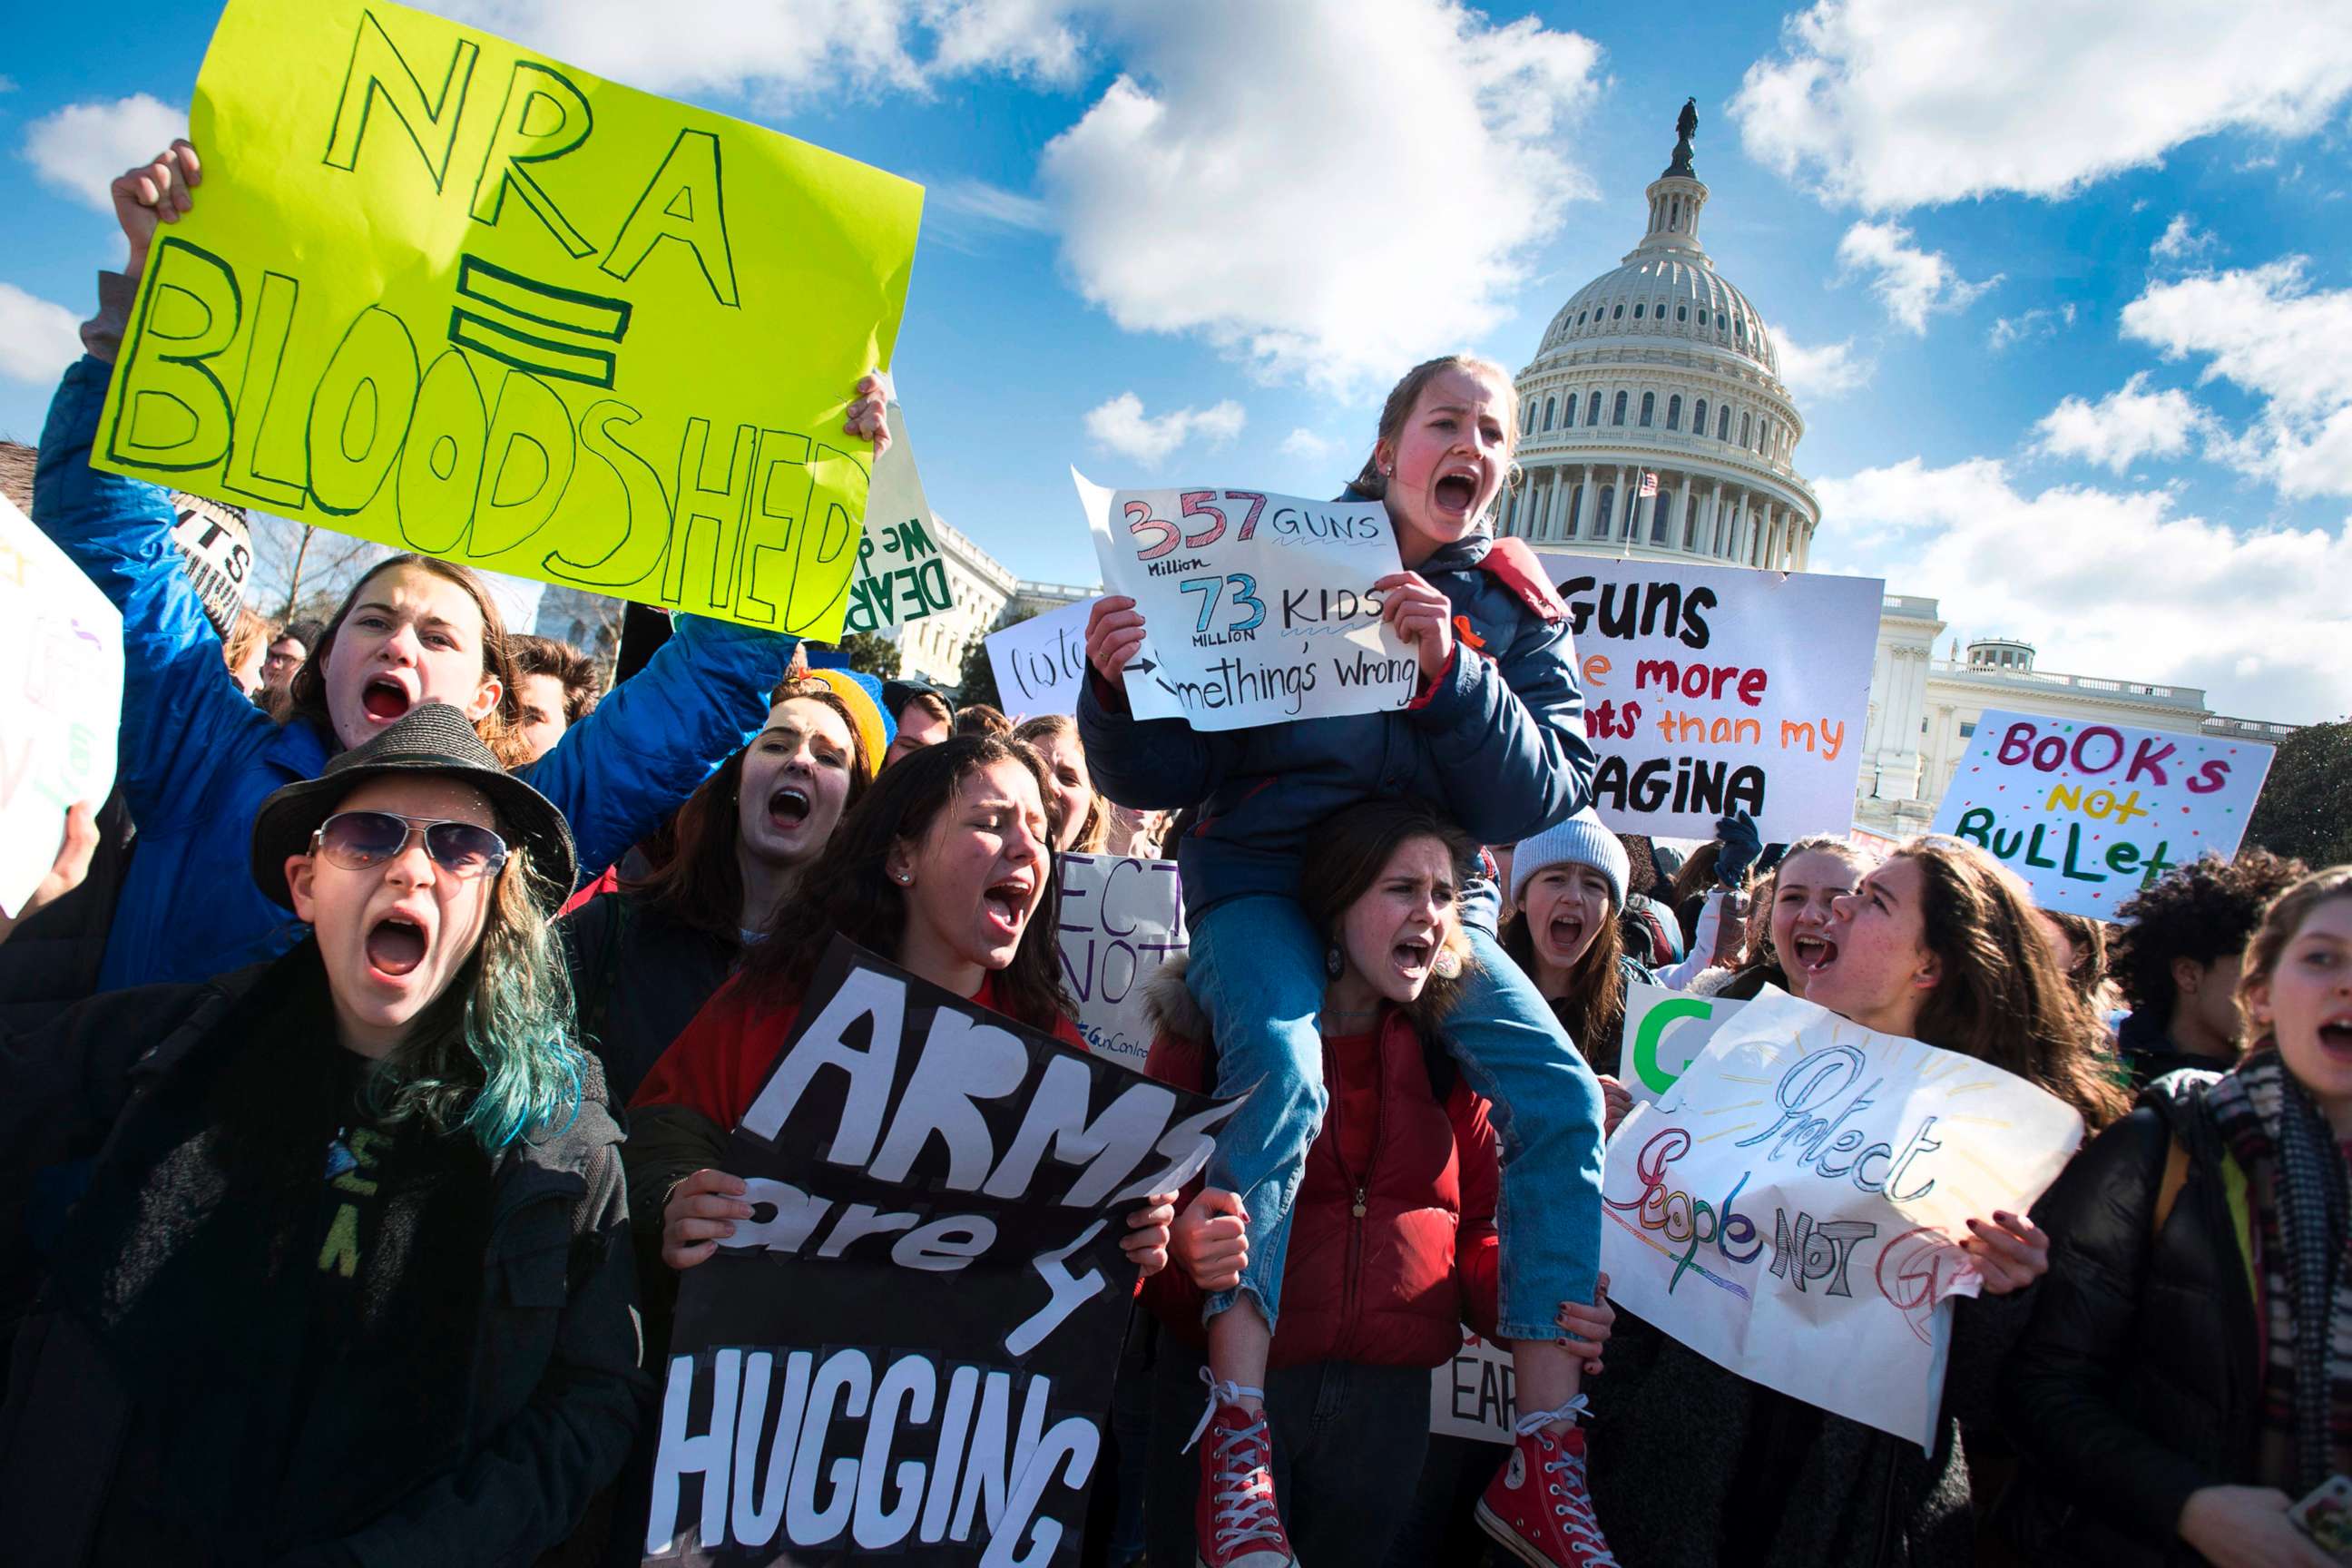 PHOTO: Students across the U.S. walked out of classes on March 14, 2018, in a nationwide call for action against gun violence following the shooting deaths last month at a Fla. high school.